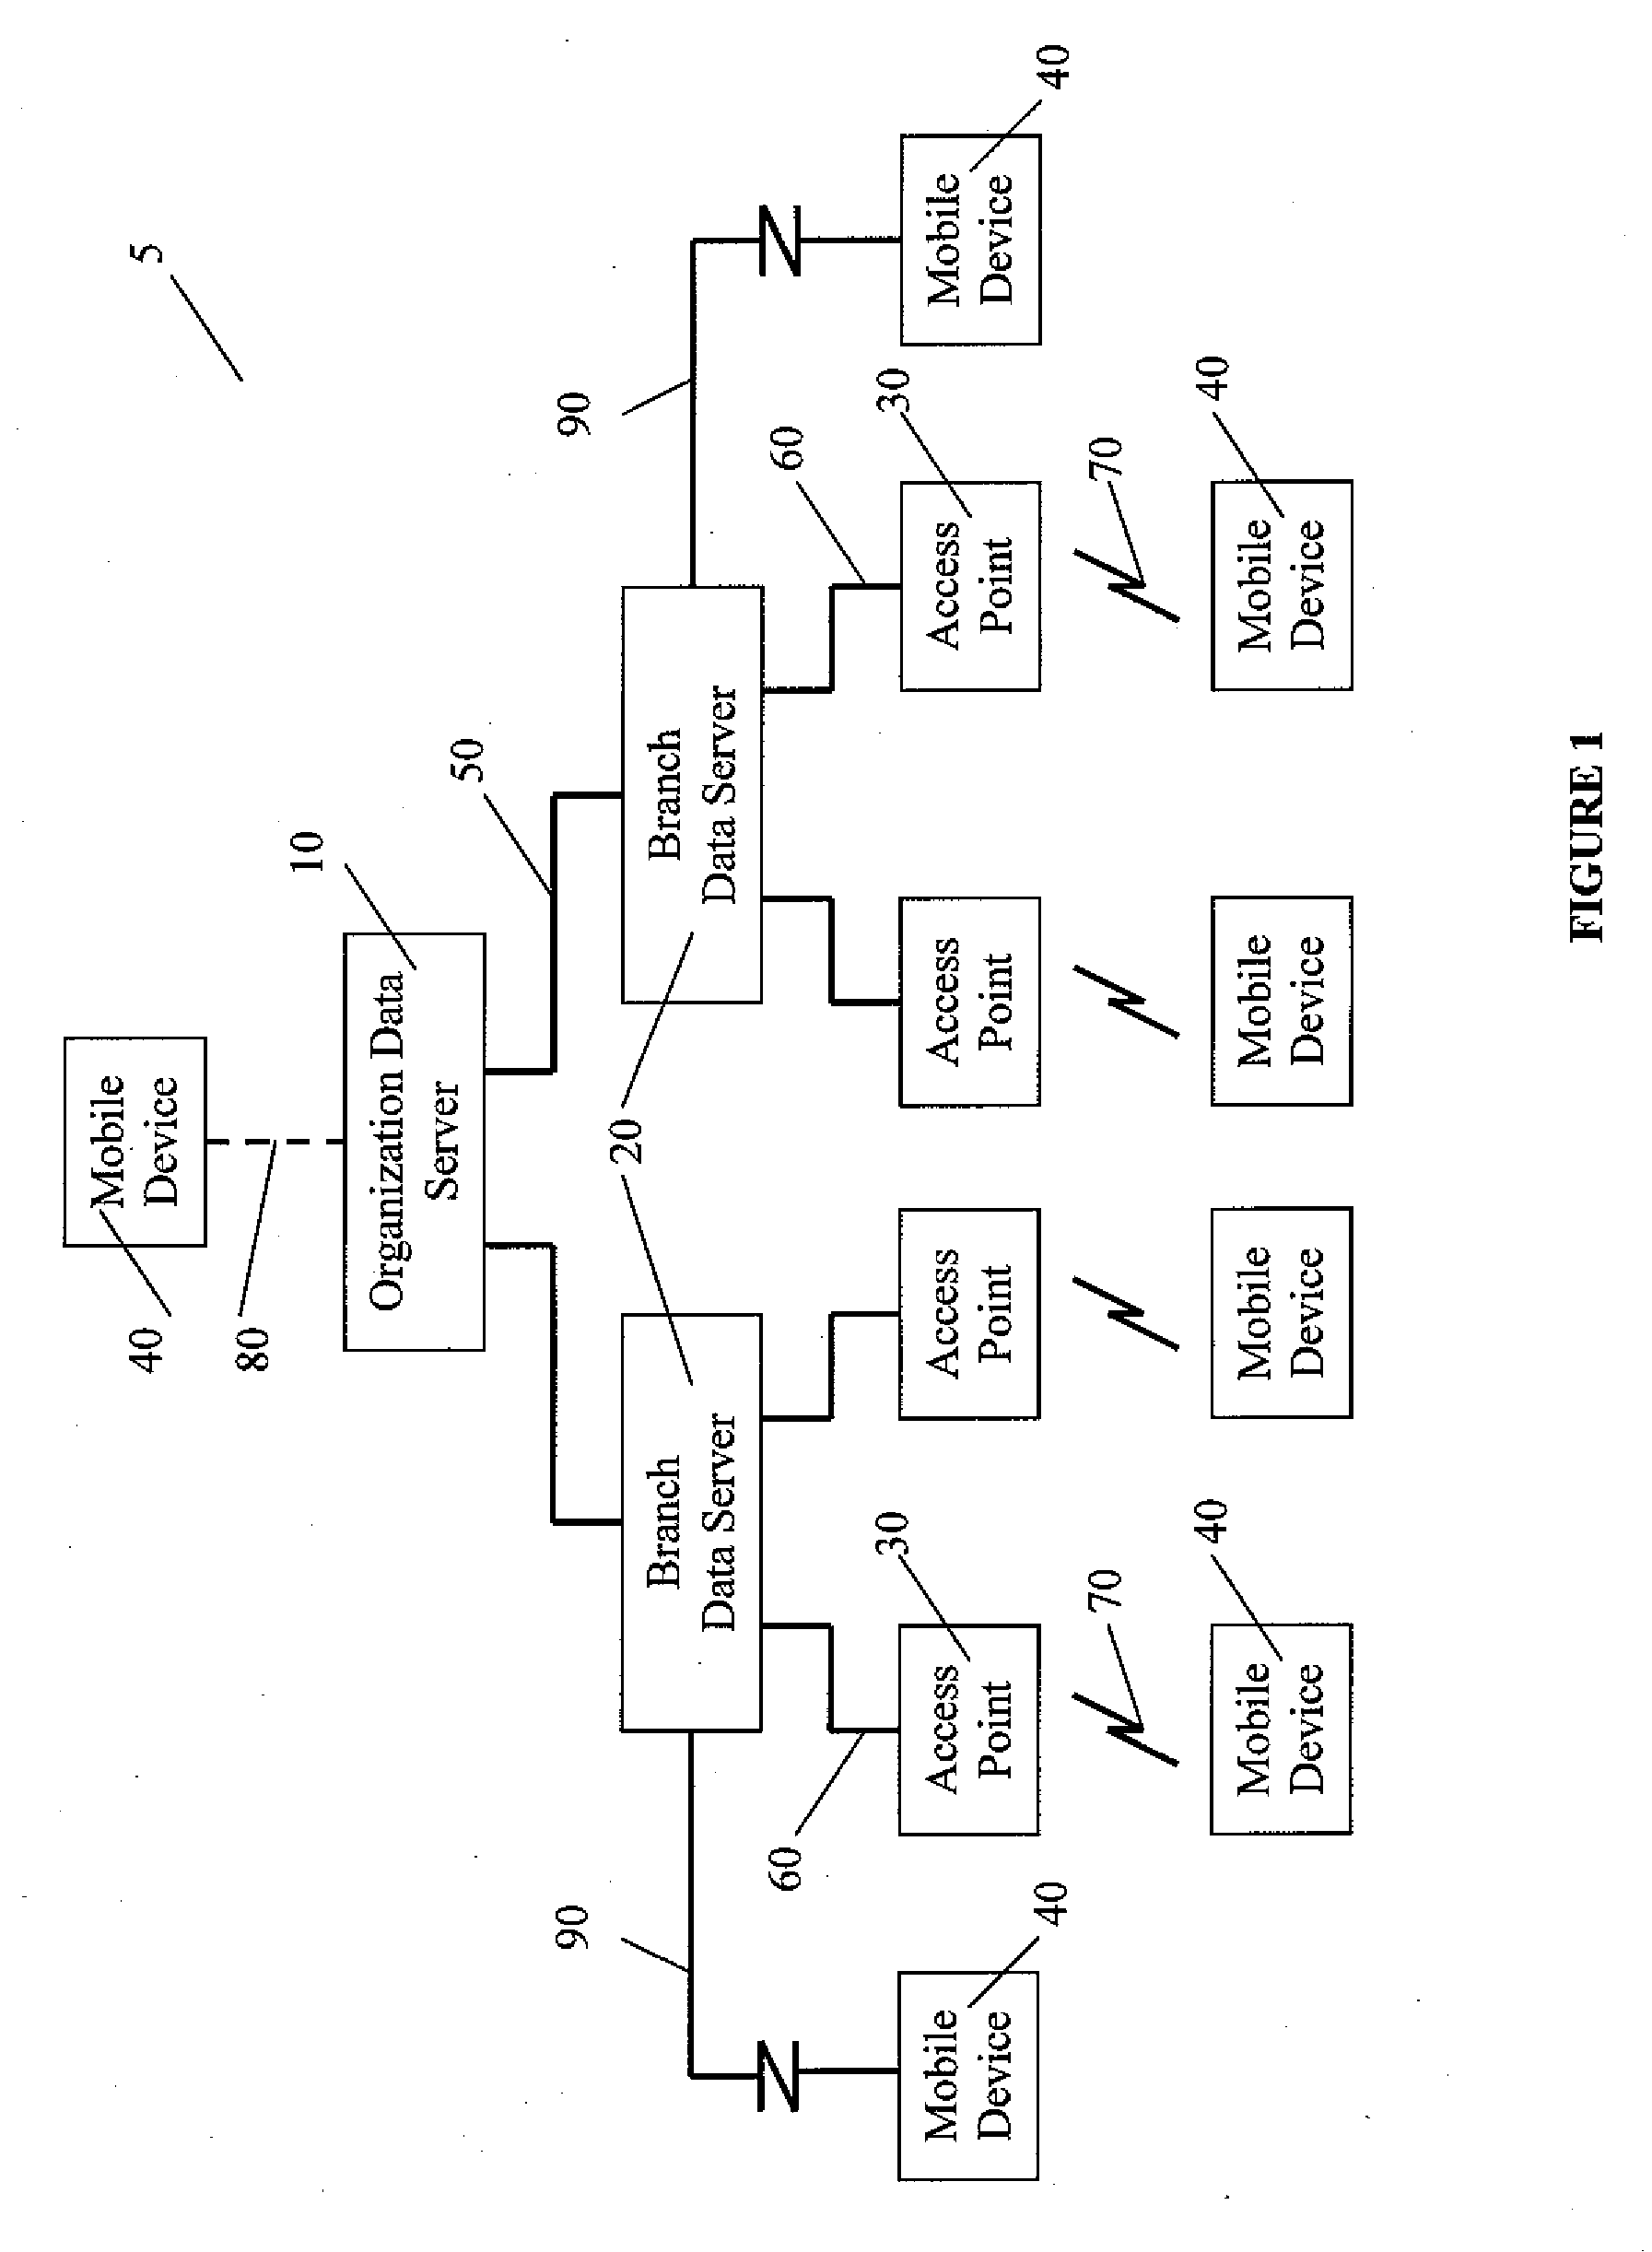 Method, system and device for enabling the public to access organizations' directories